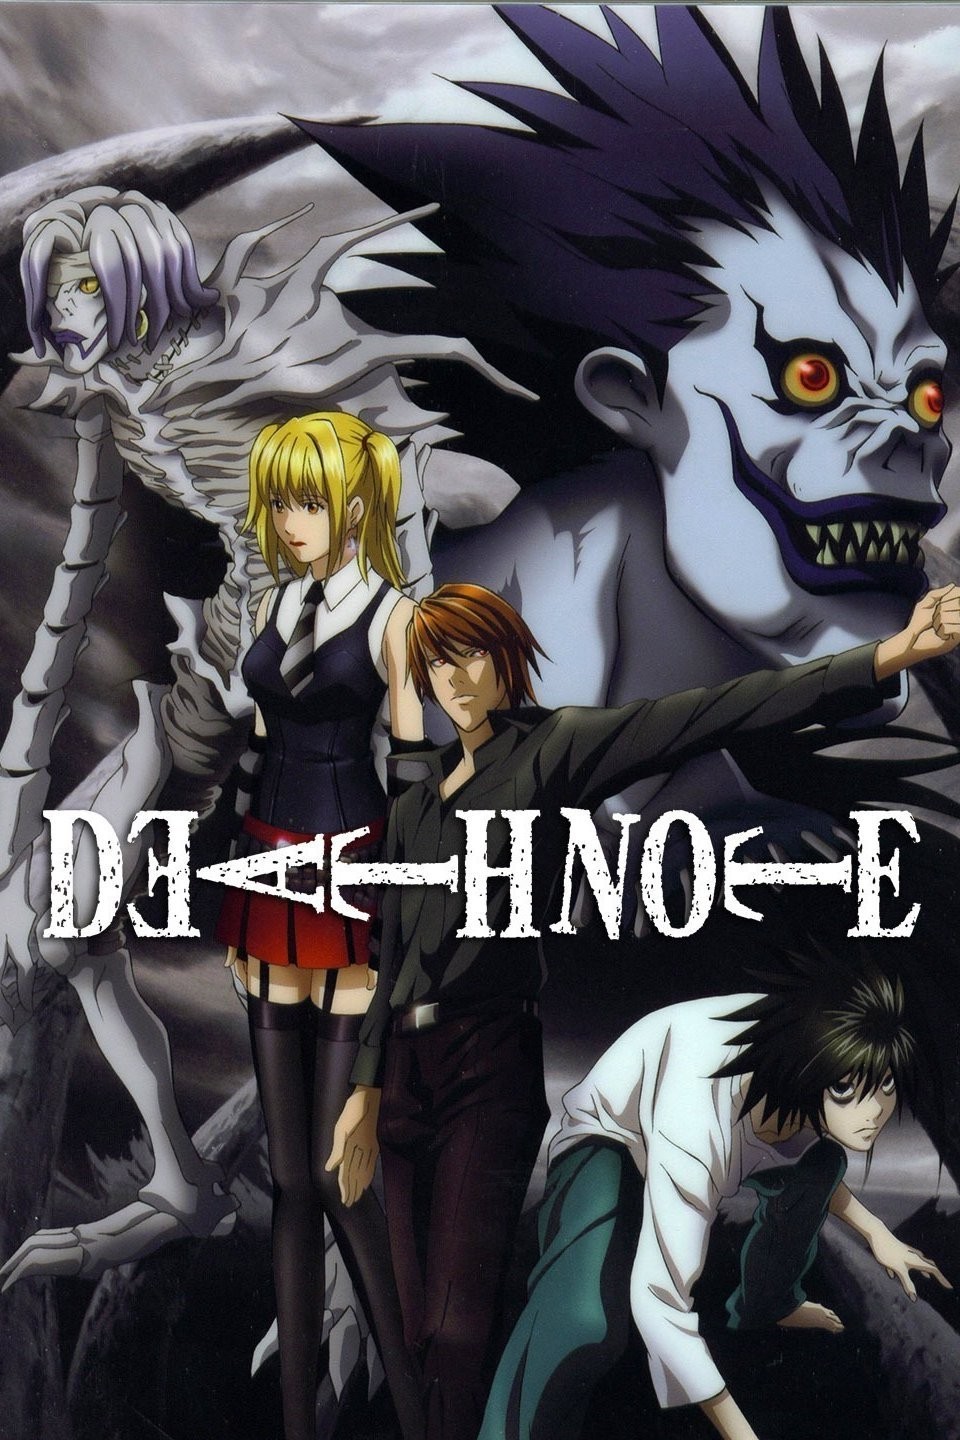 Film Adaptation of Hit Manga Series Death Note Casts Lead Actor - GameSpot